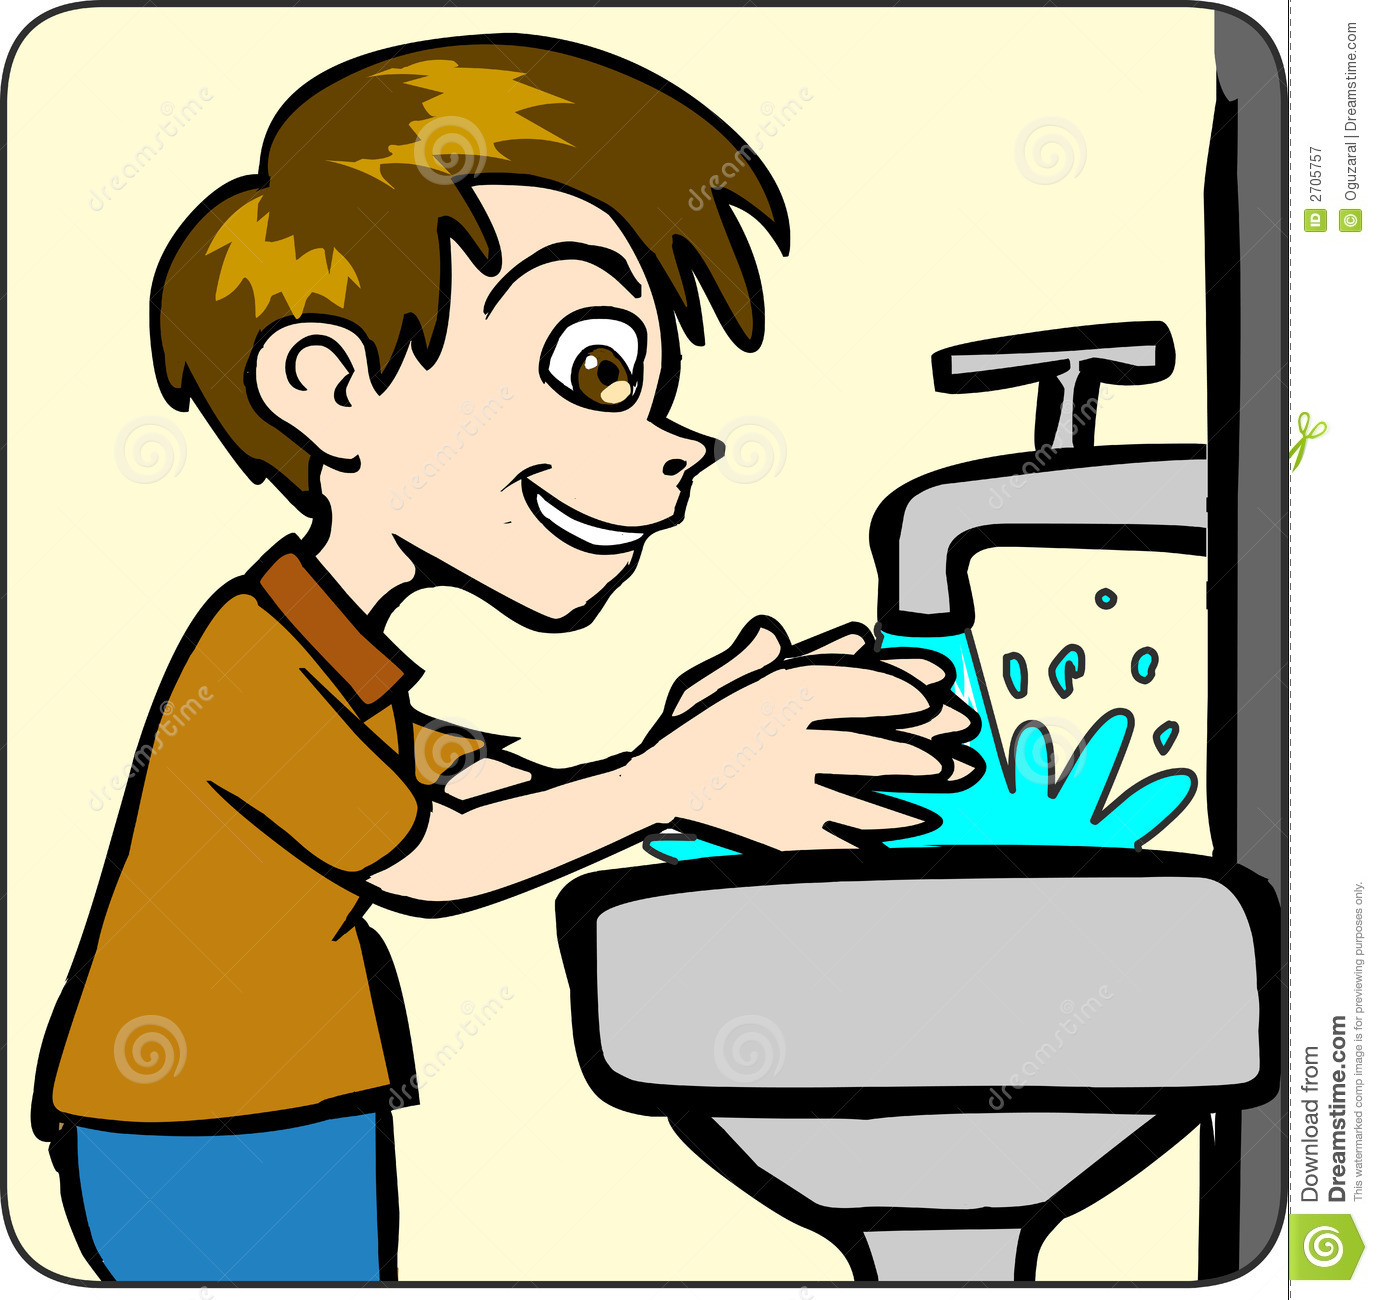 13 Clipart Washing Hands Free Cliparts That You Can Download To You